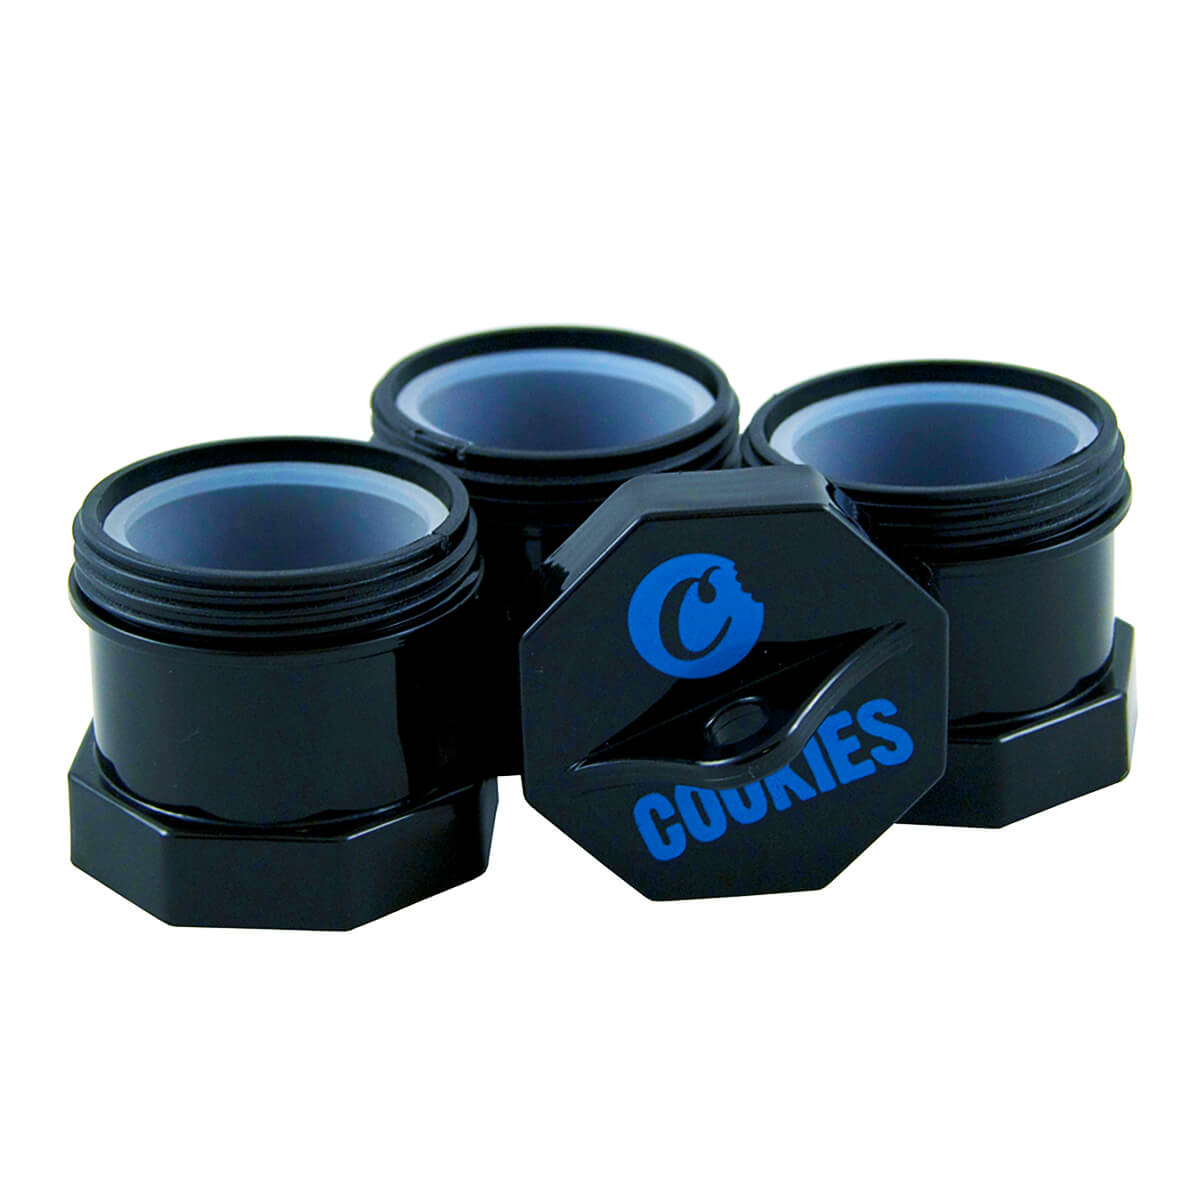 https://d30qj4y22qnbc7.cloudfront.net/wp-content/uploads/2020/10/wholesale-cookies-black-small-stacked-plastic-containers-3.jpg